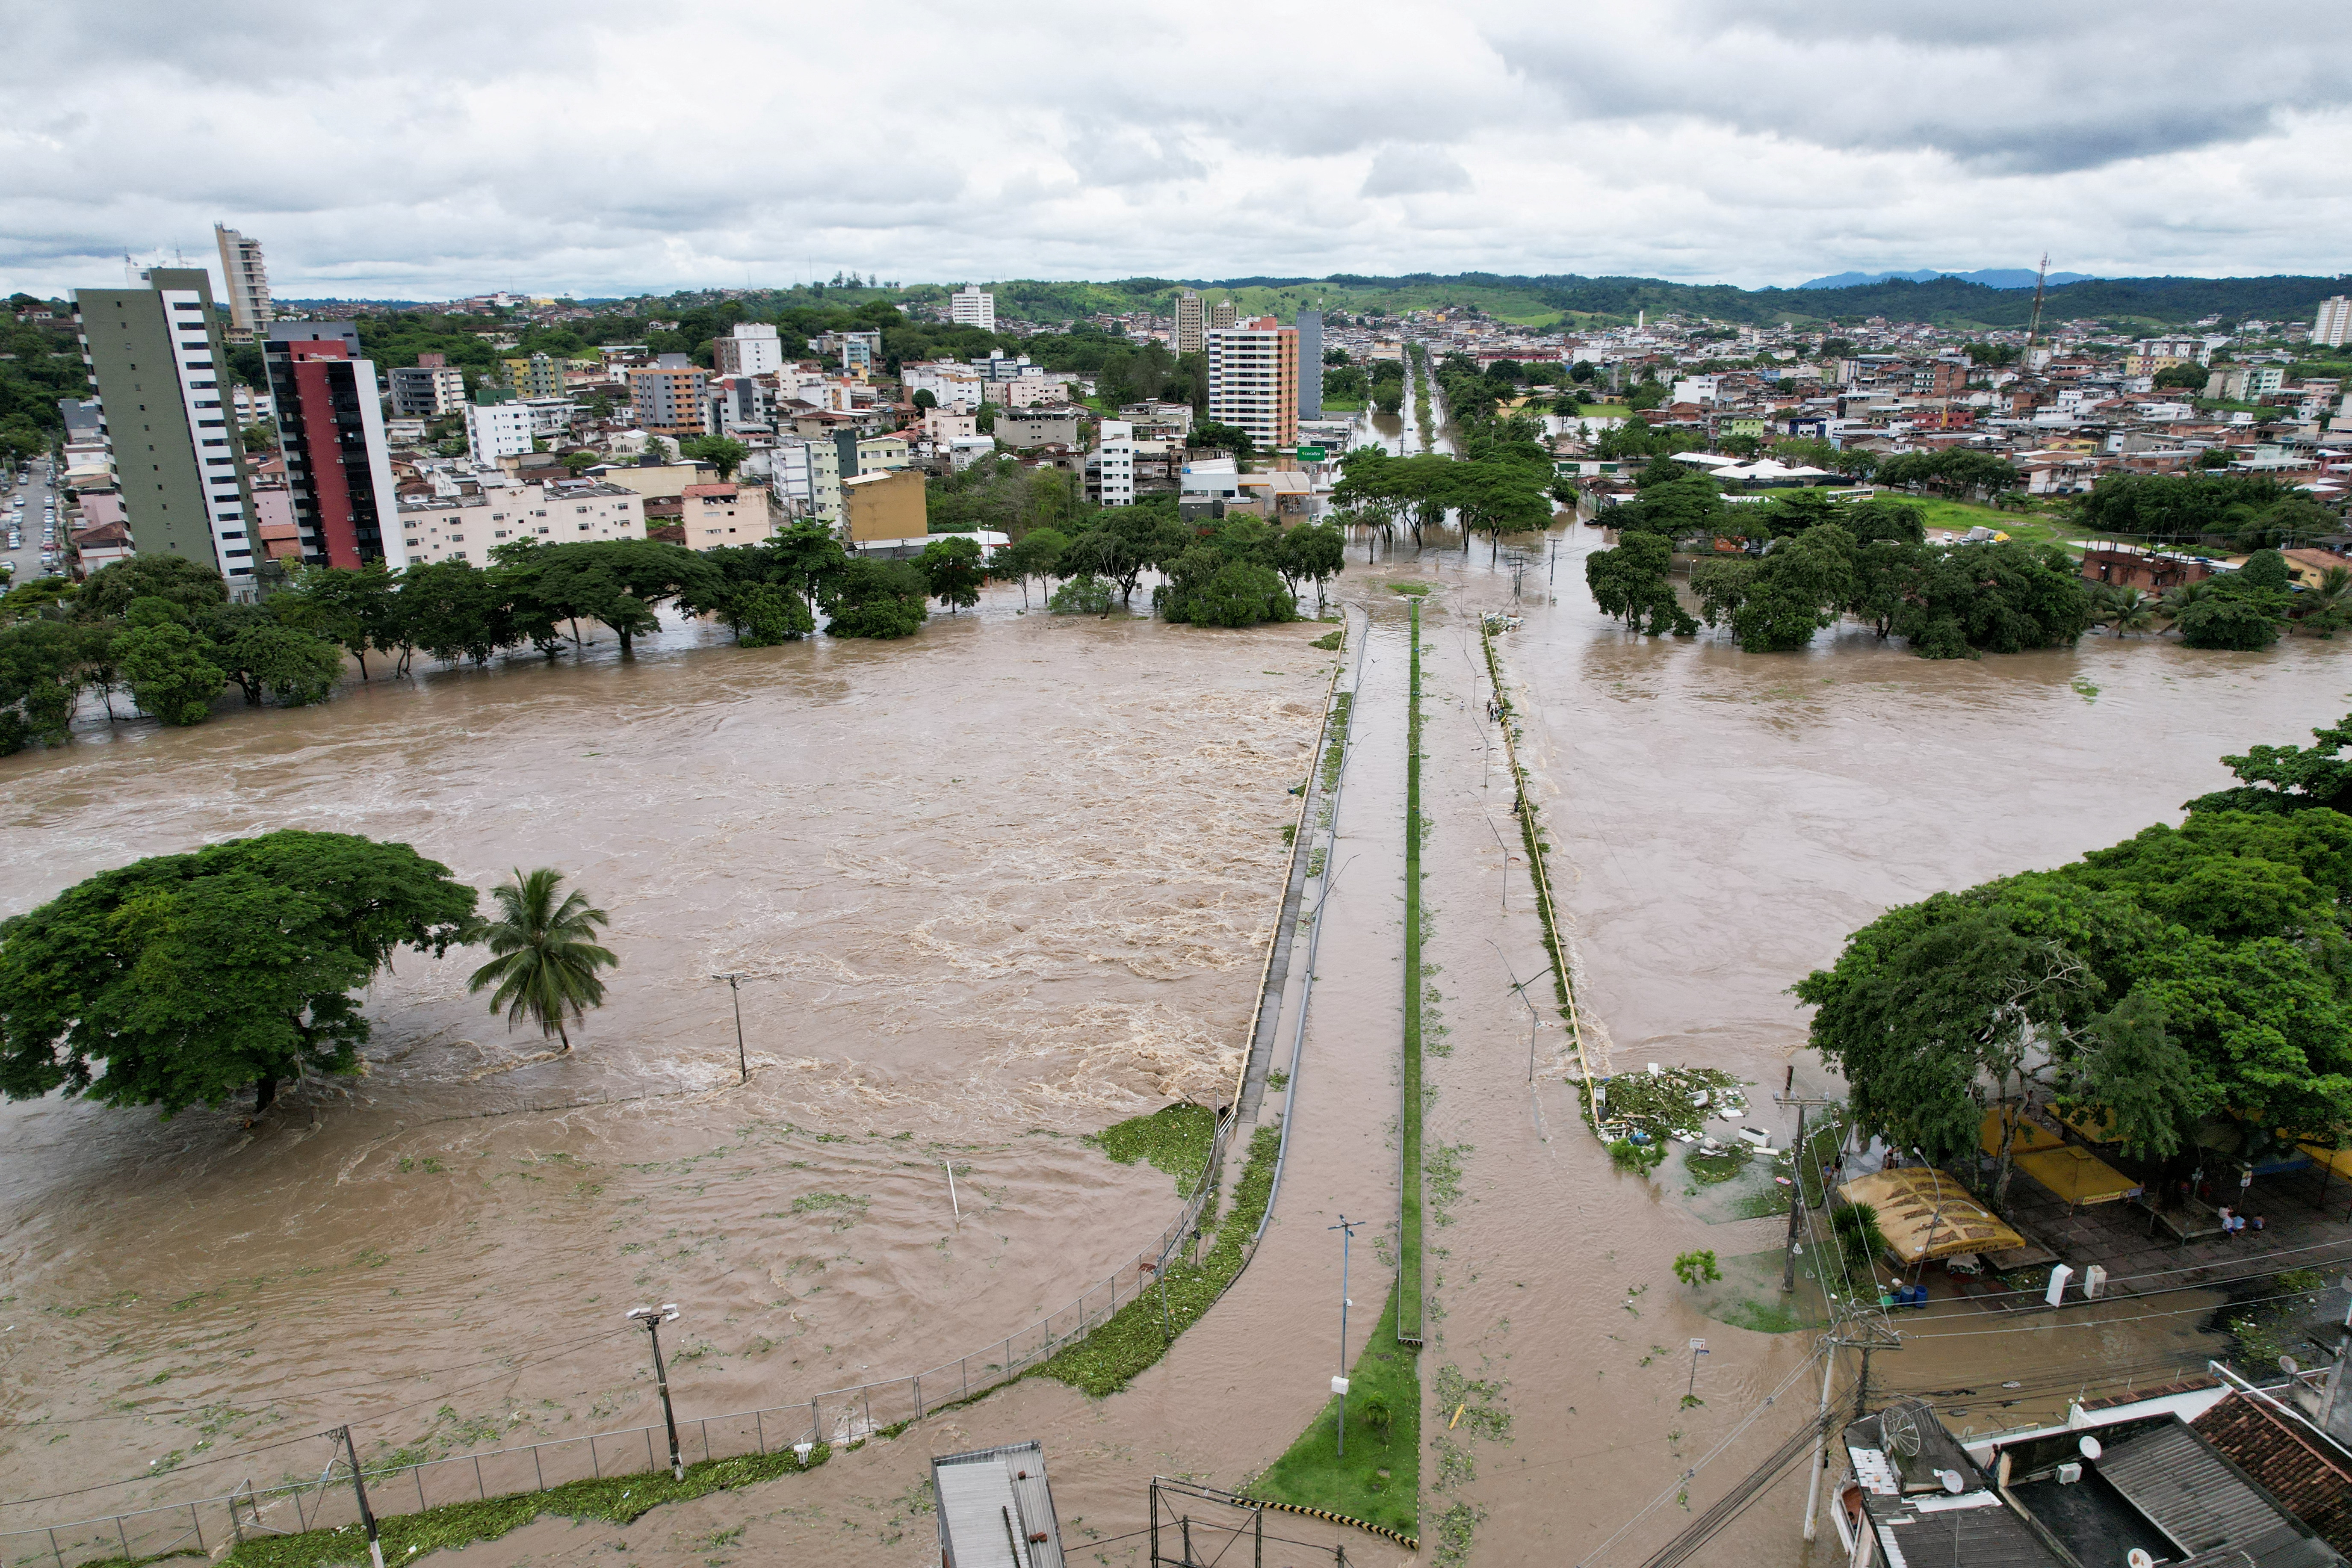 Flooding caused by overflowing rivers in Bahia